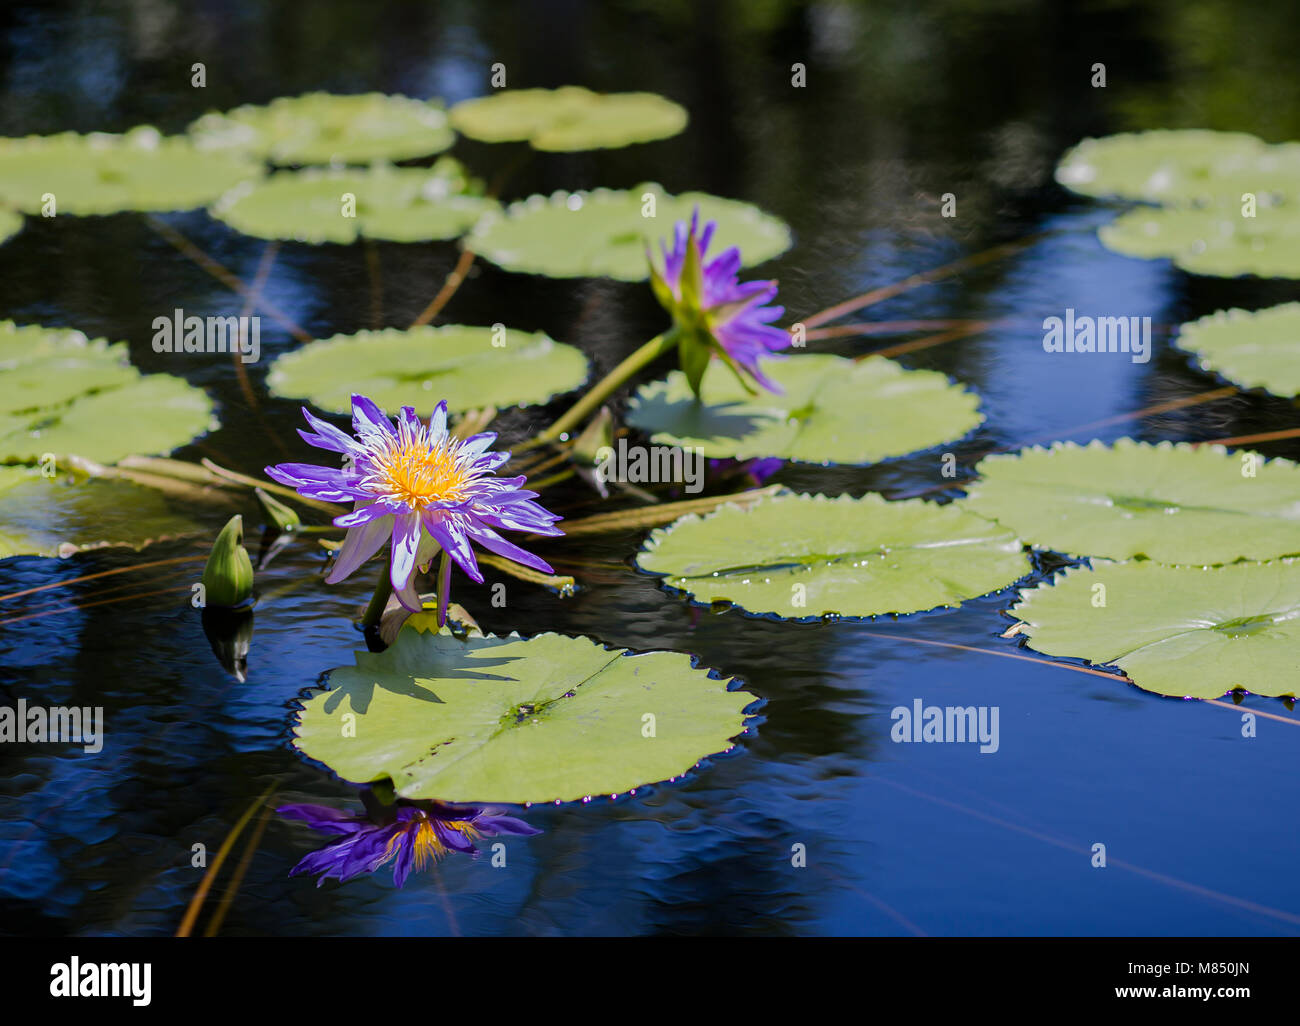 Water Lilies in a Calm Pond Surrounded by Lily Pads Stock Photo